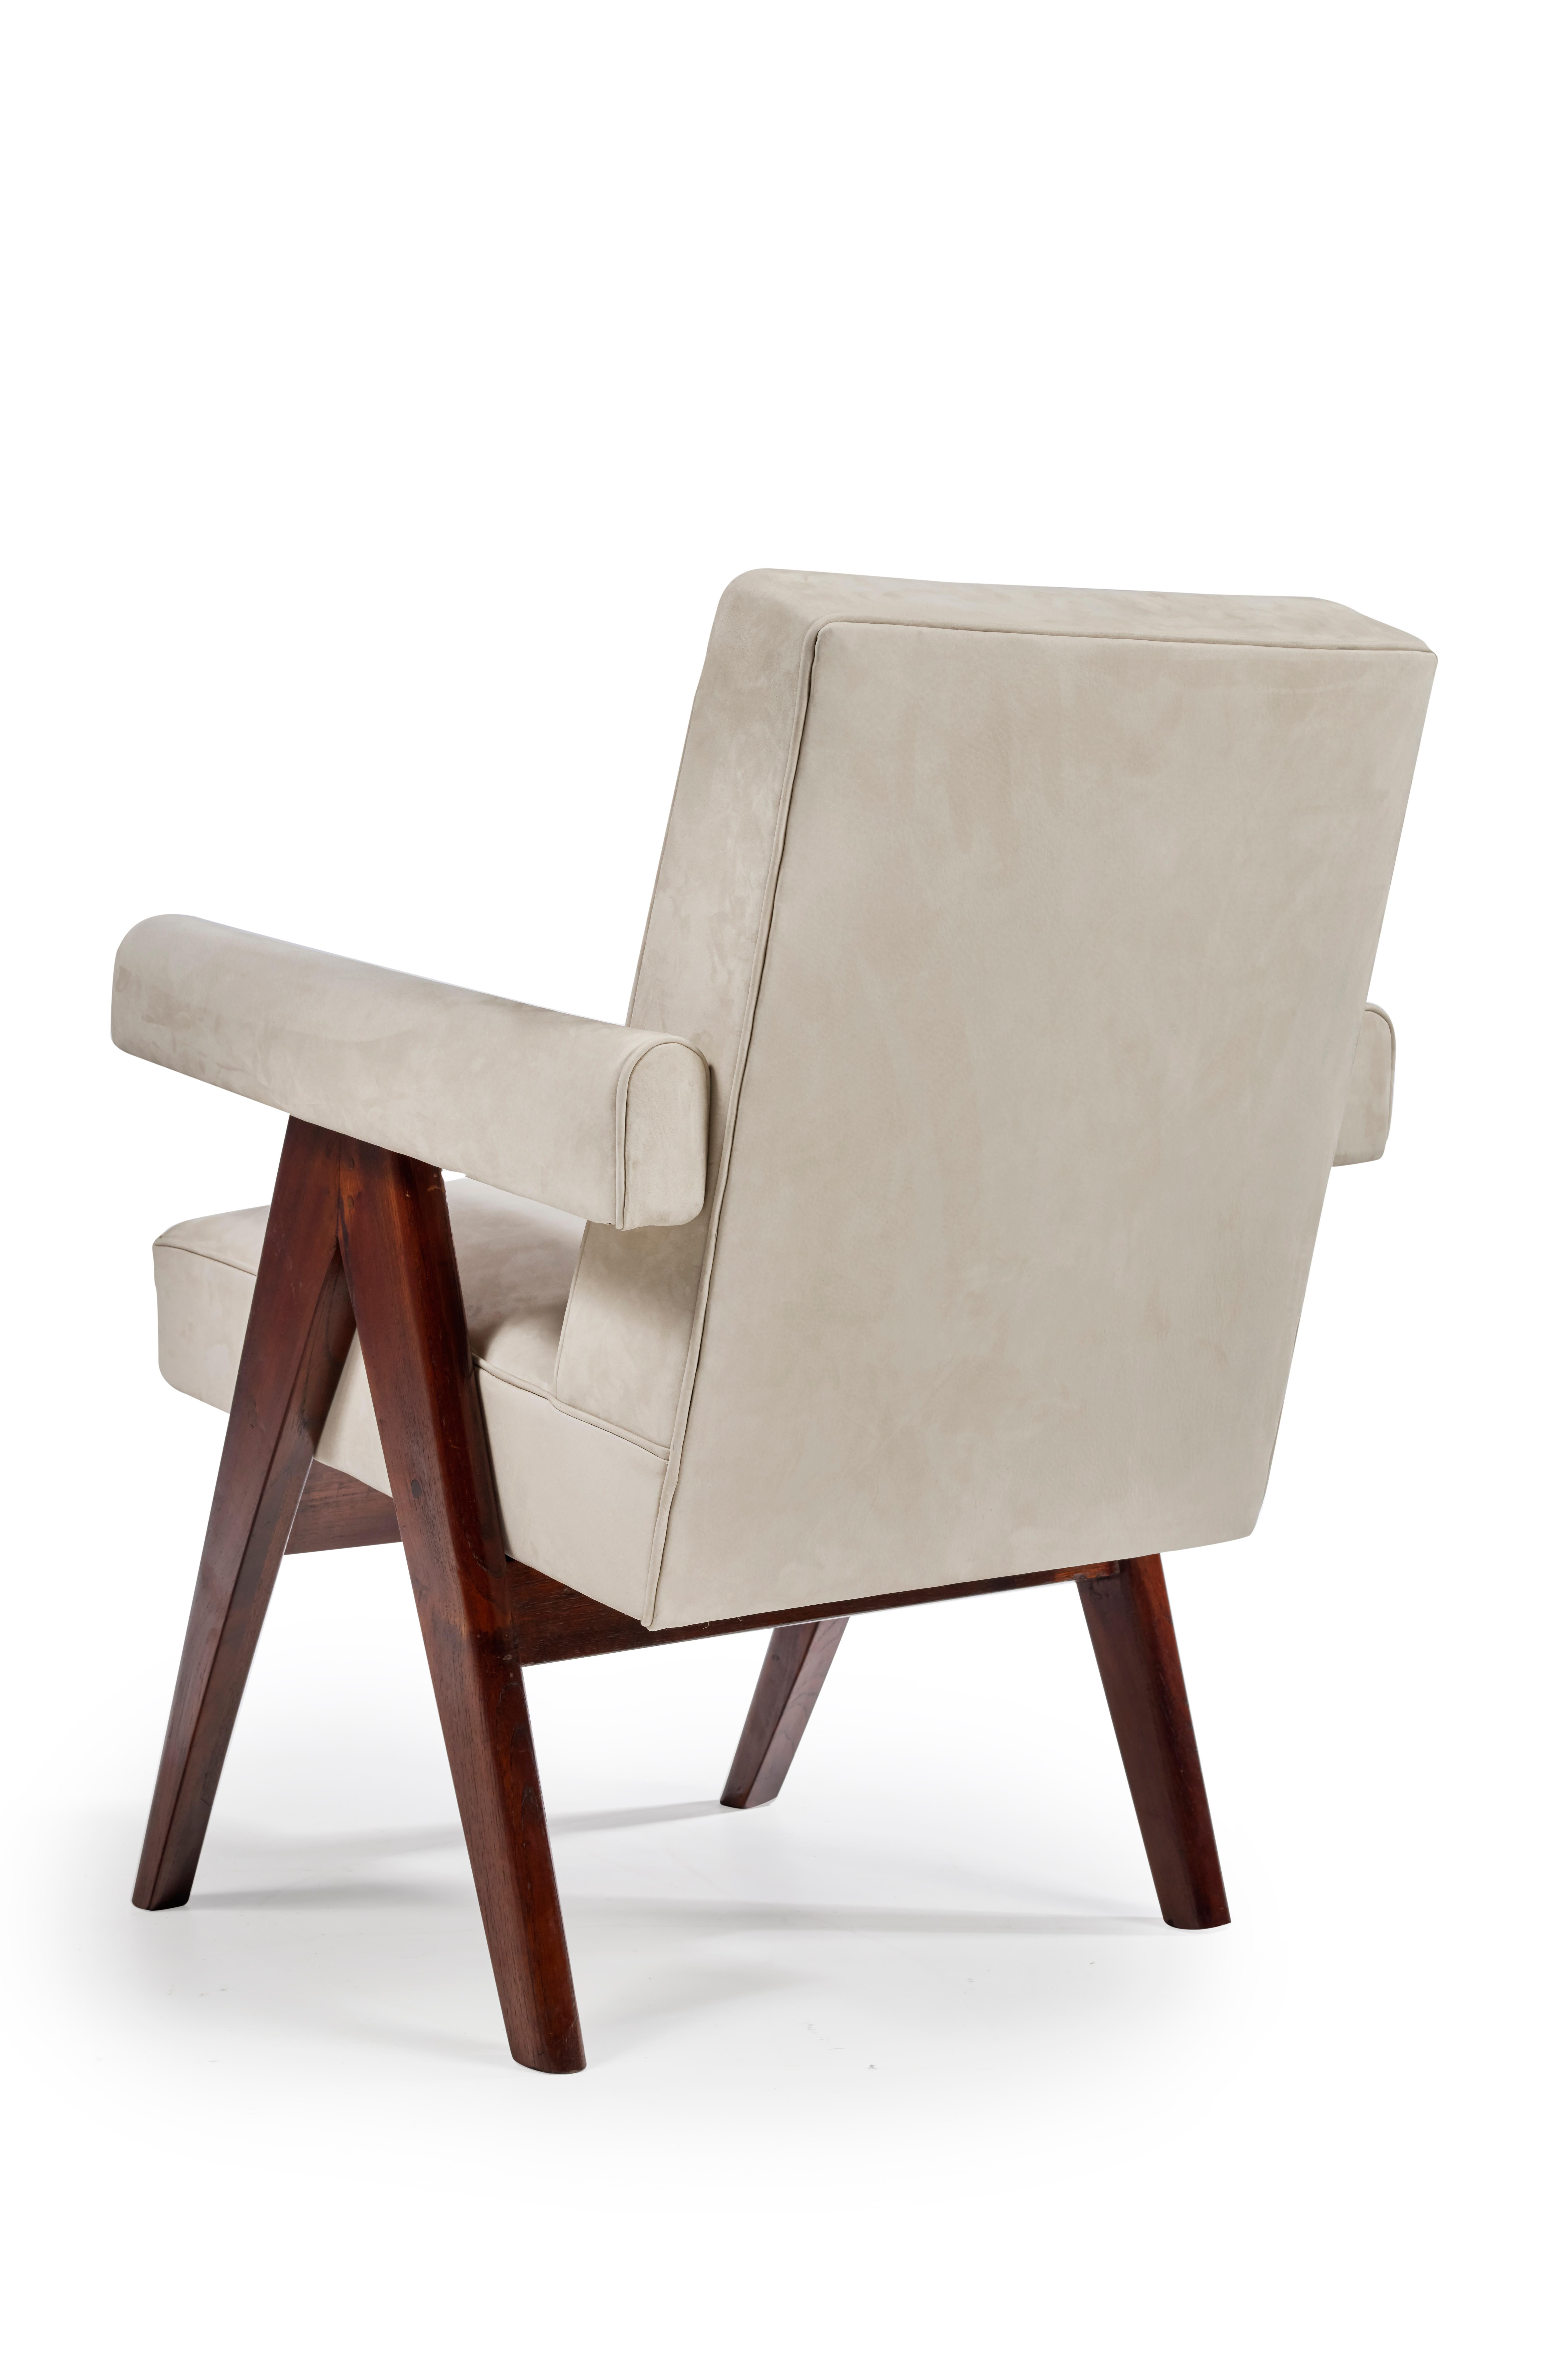 Leather Pierre Jeanneret, PJ-SI-30-D, Committee Armchair, Chandigarh, circa 1955